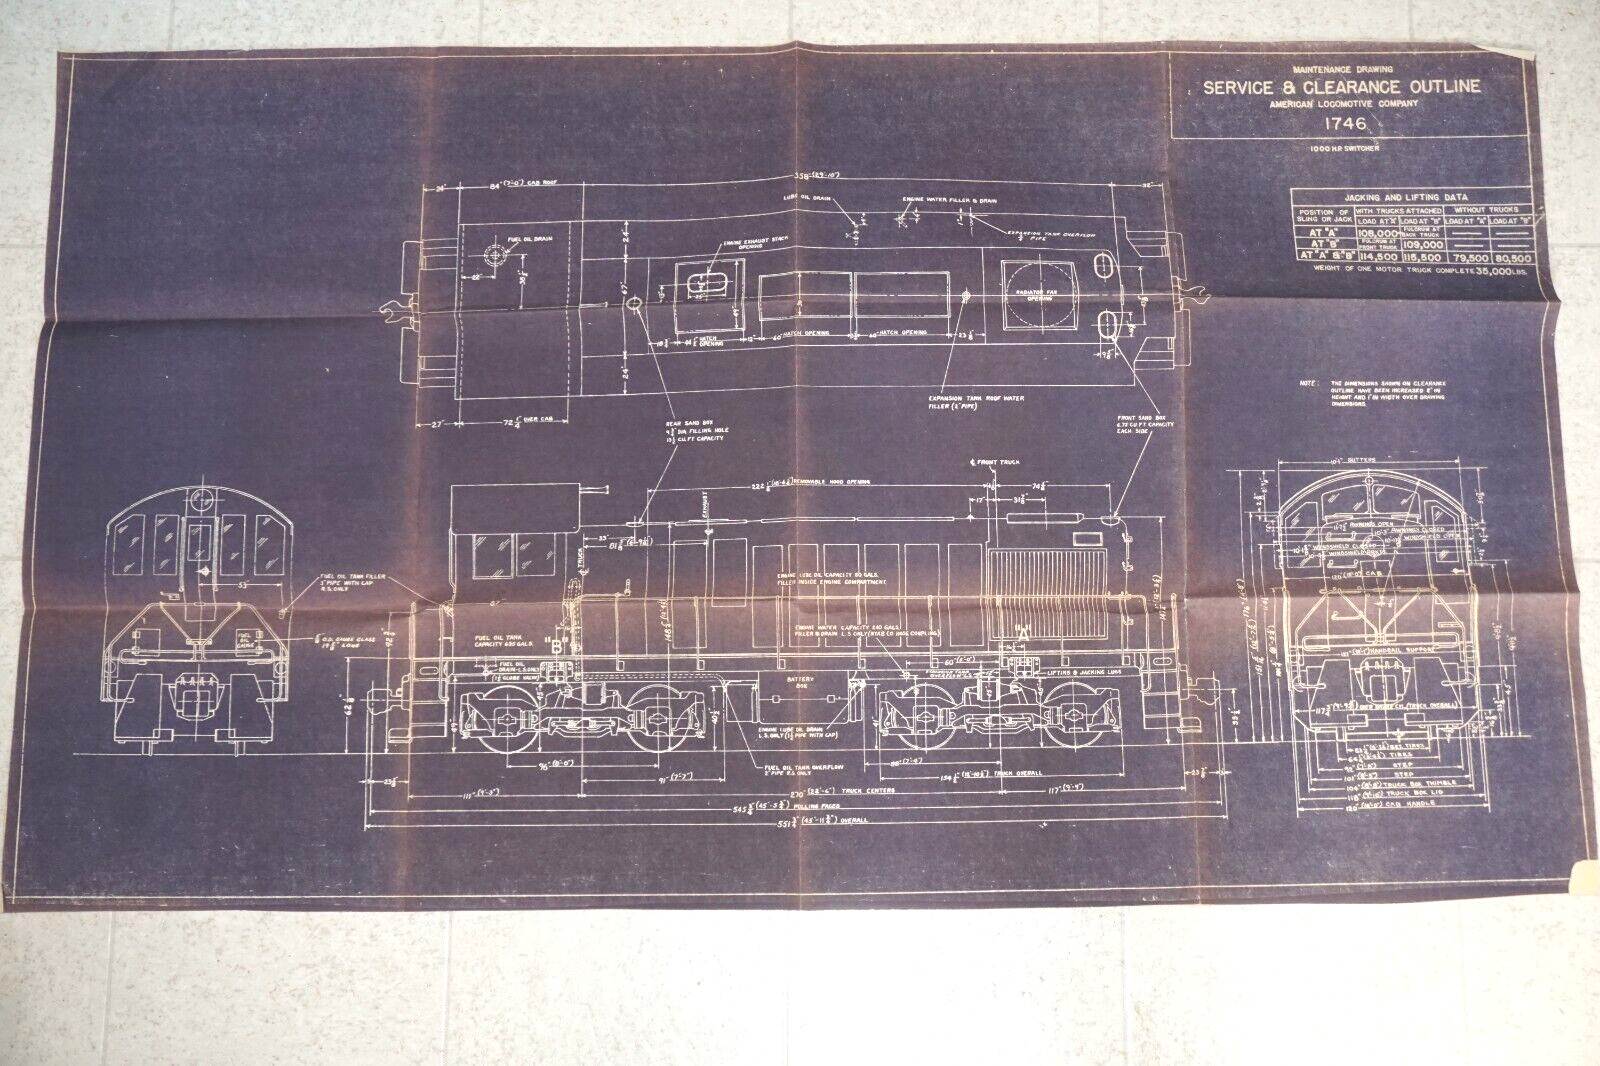 MAINTENANCE DRAWING Service Clearance Switcher BLUEPRINT AMERICAN LOCOMOTIVE CO